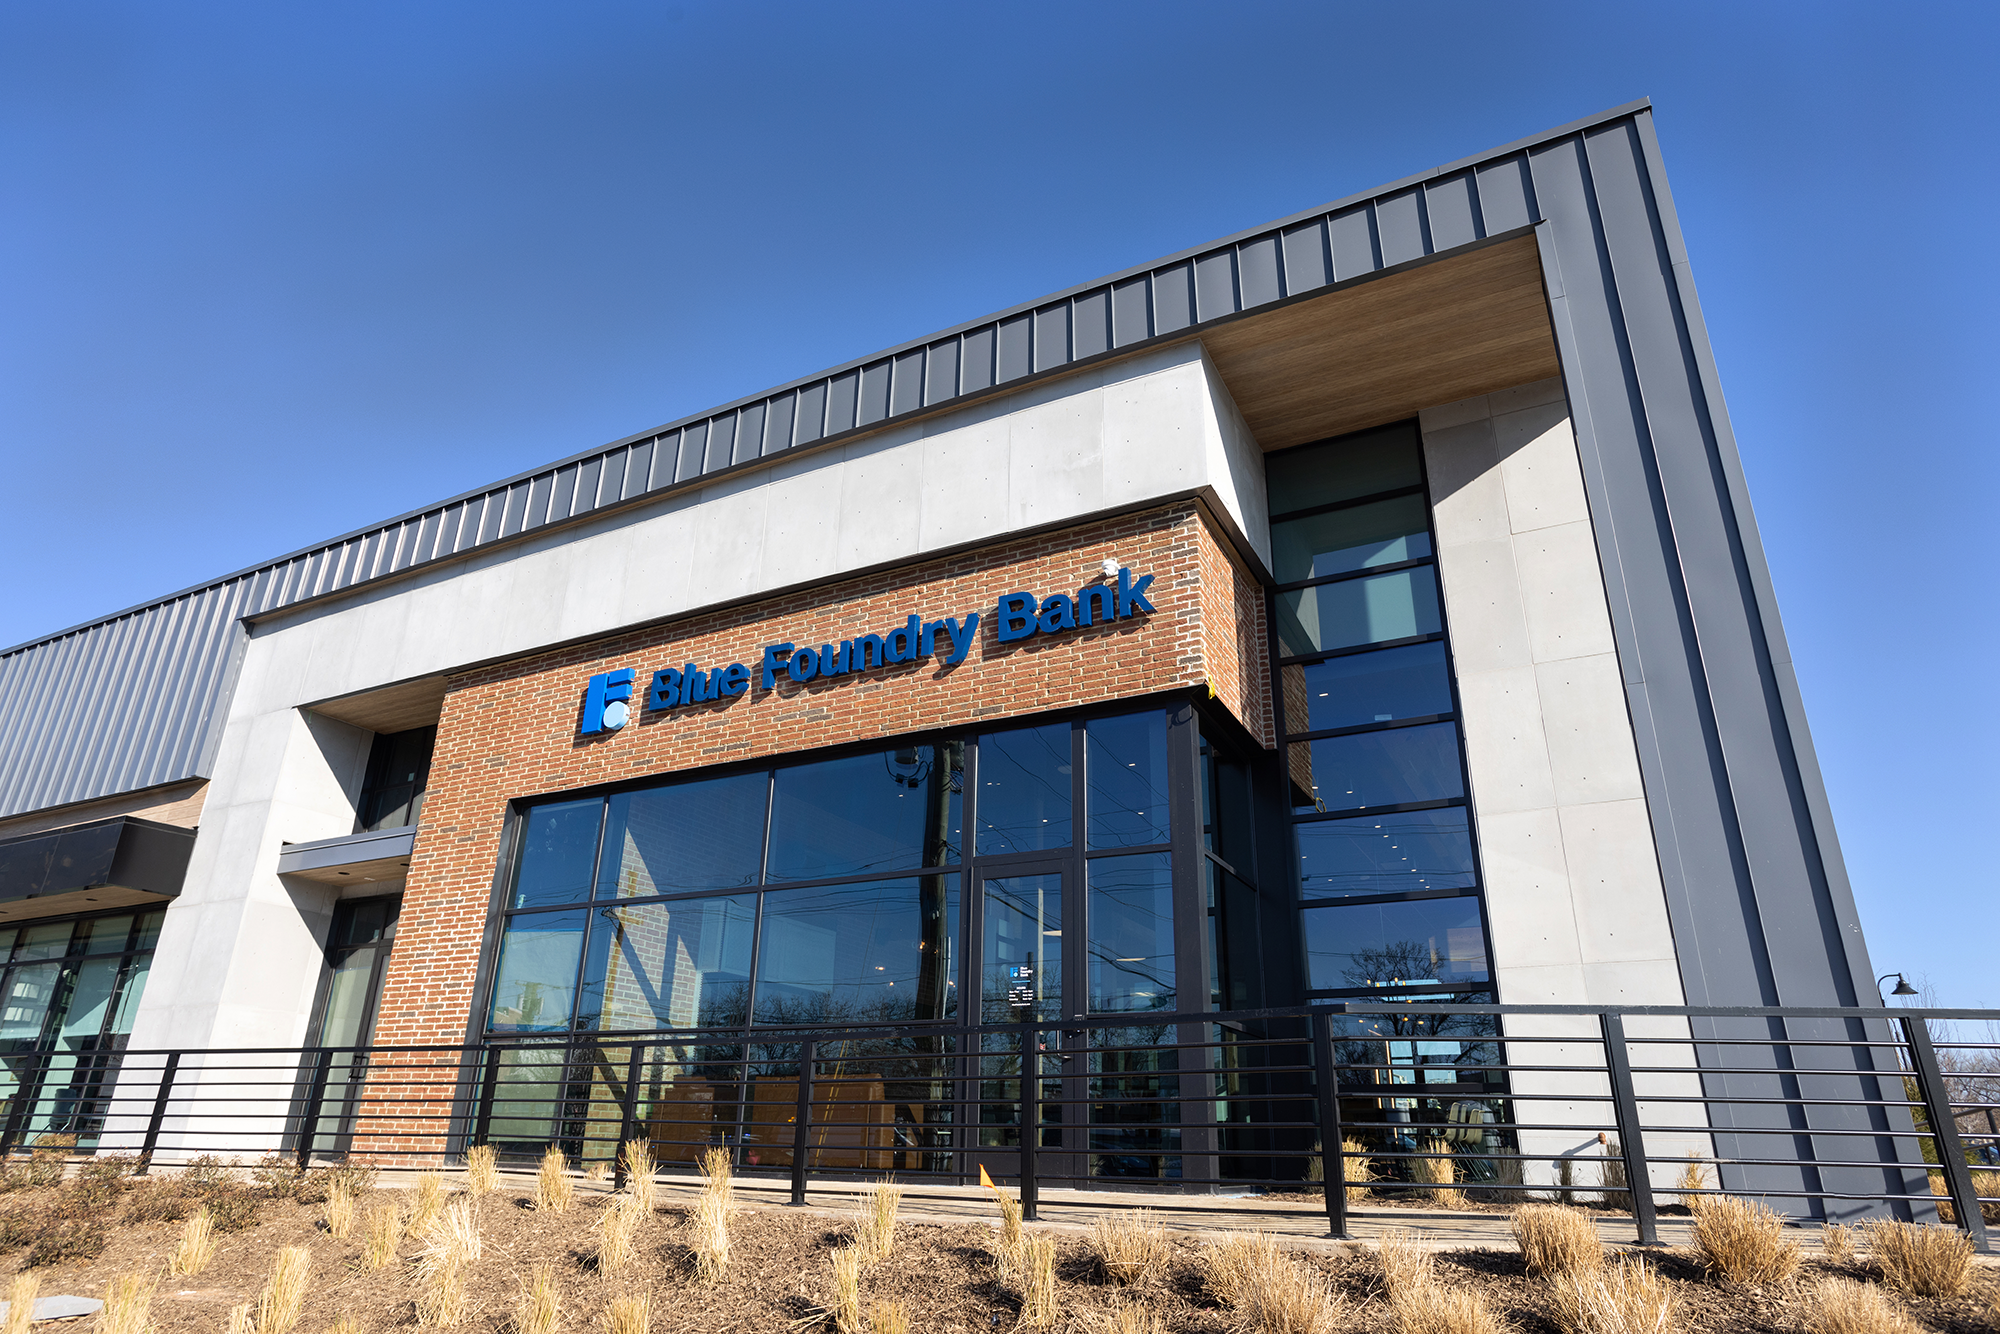 BLUE FOUNDRY BANK OPEN NEW BRANCH LOCATION IN HACKENSACK, NJ